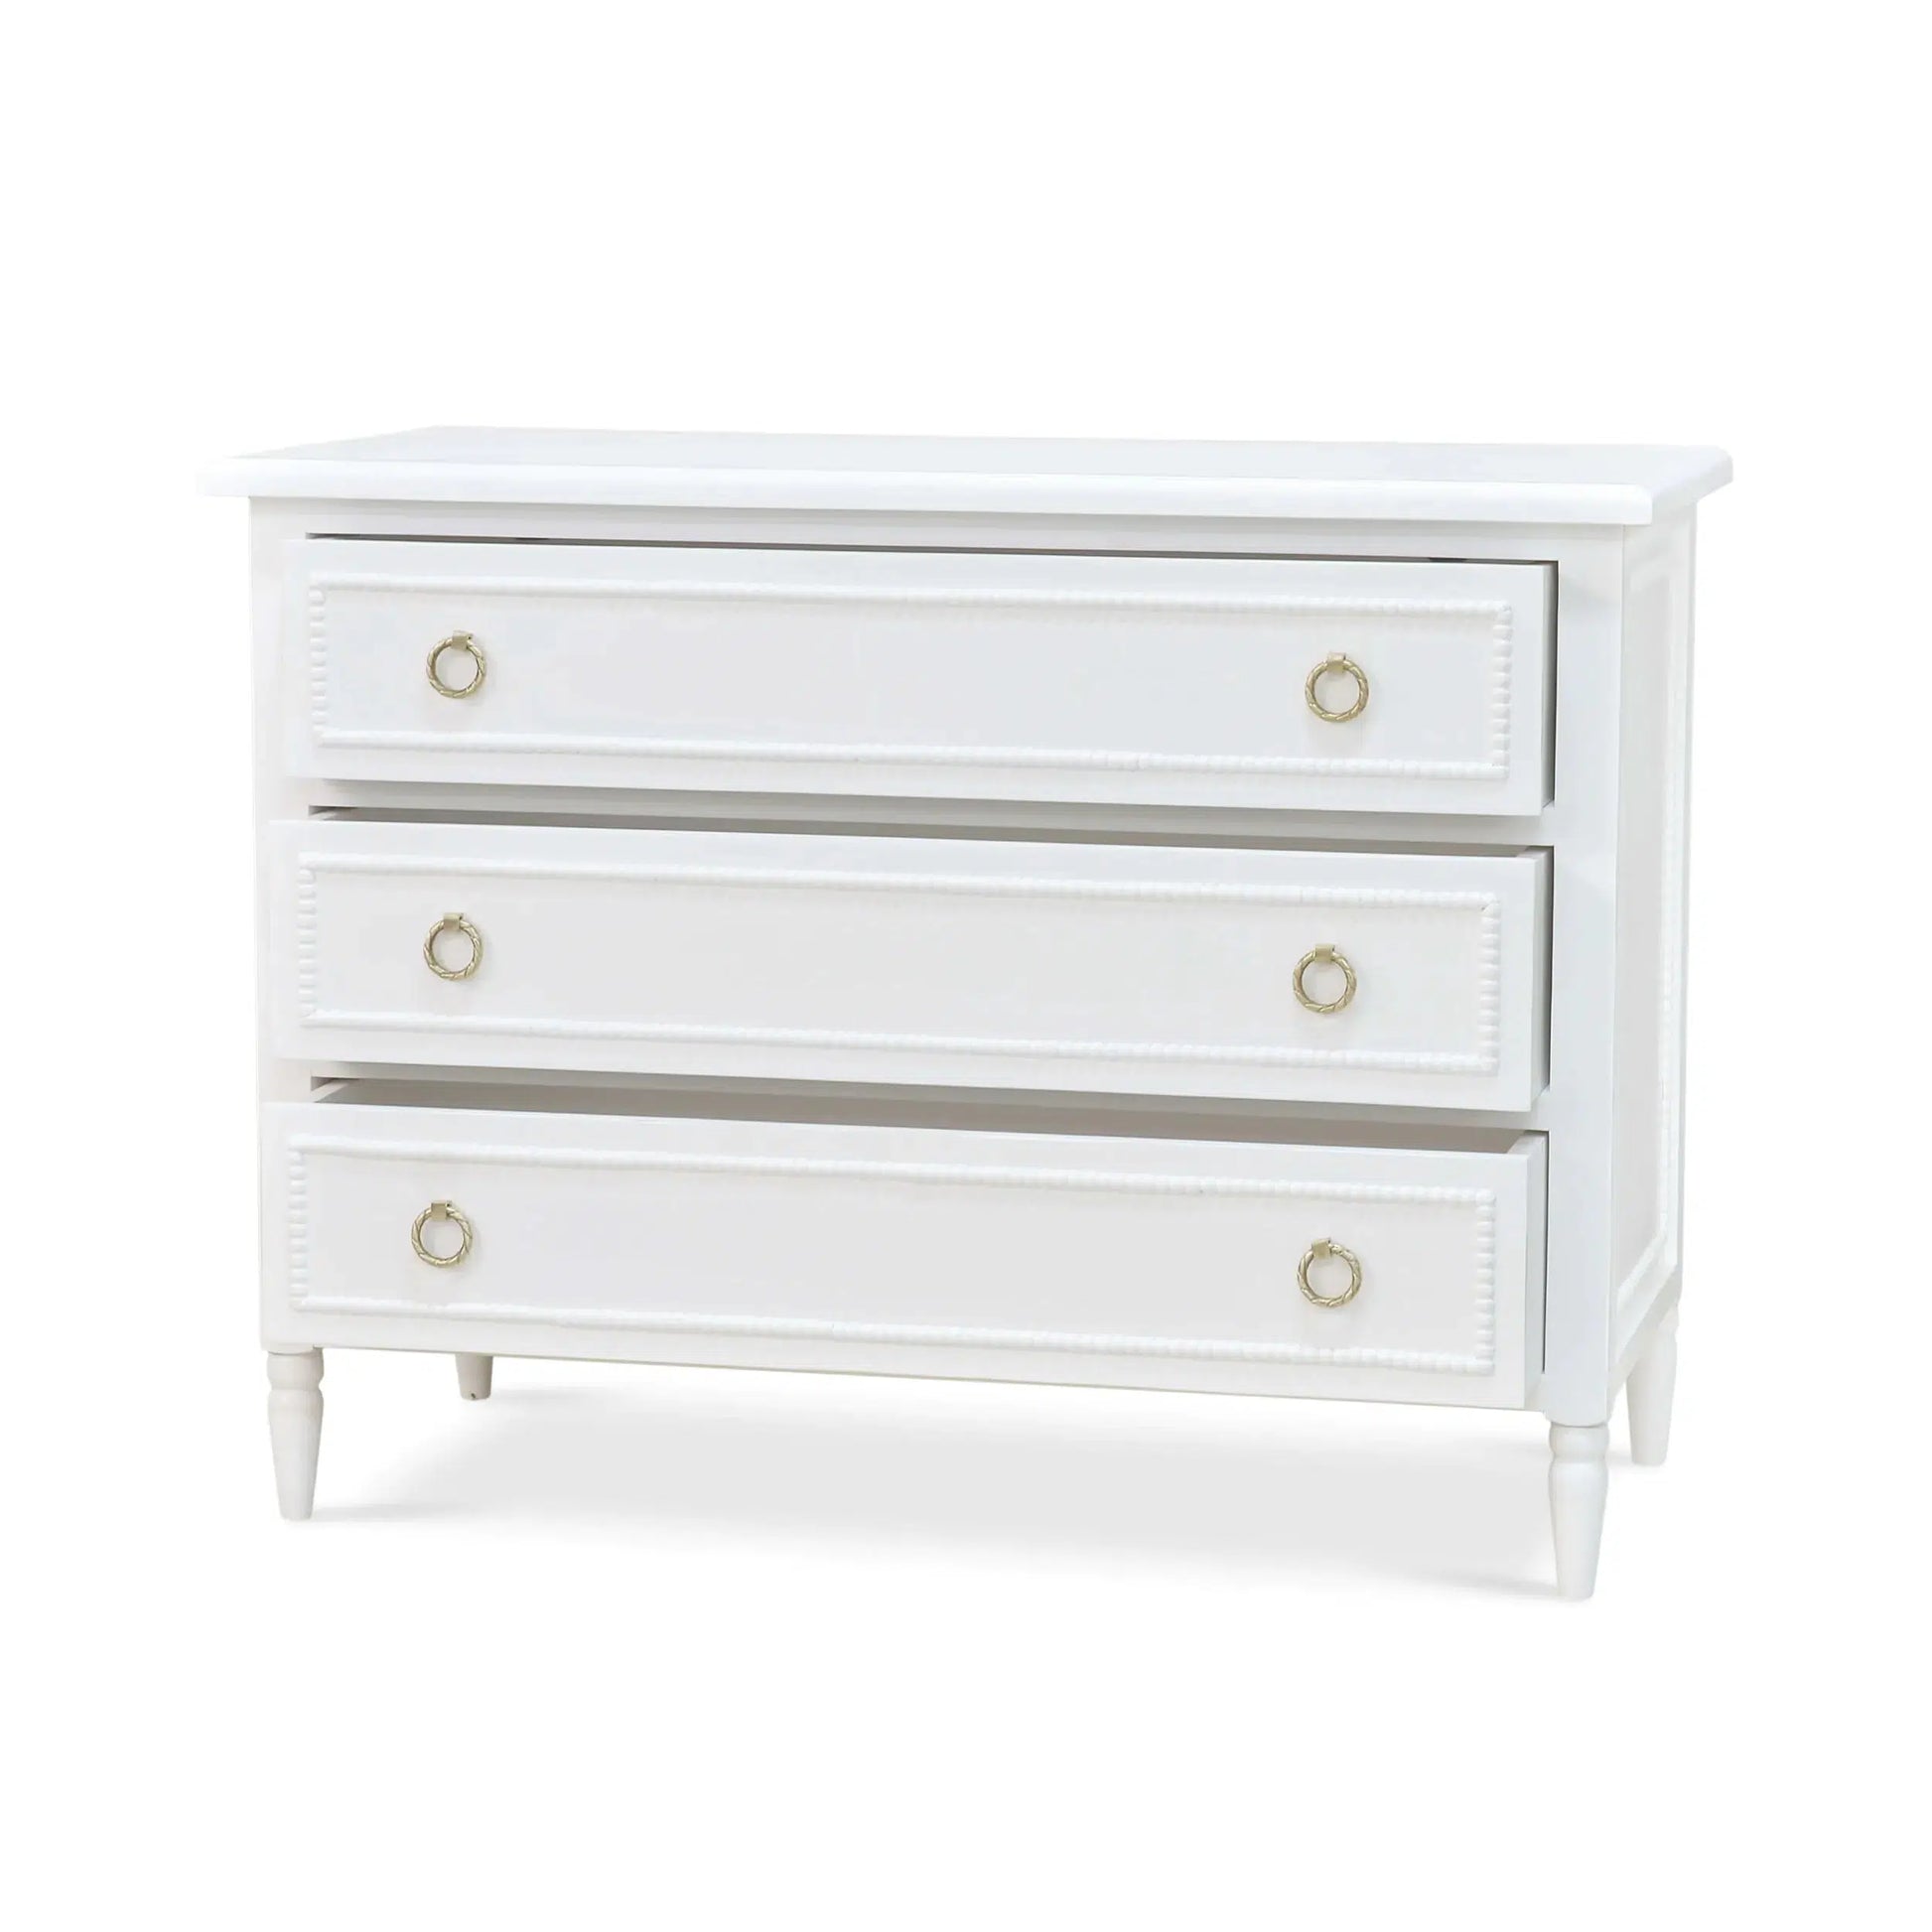 Cholet 3 Drawer Dresser In Architectural White-Blue Hand Home